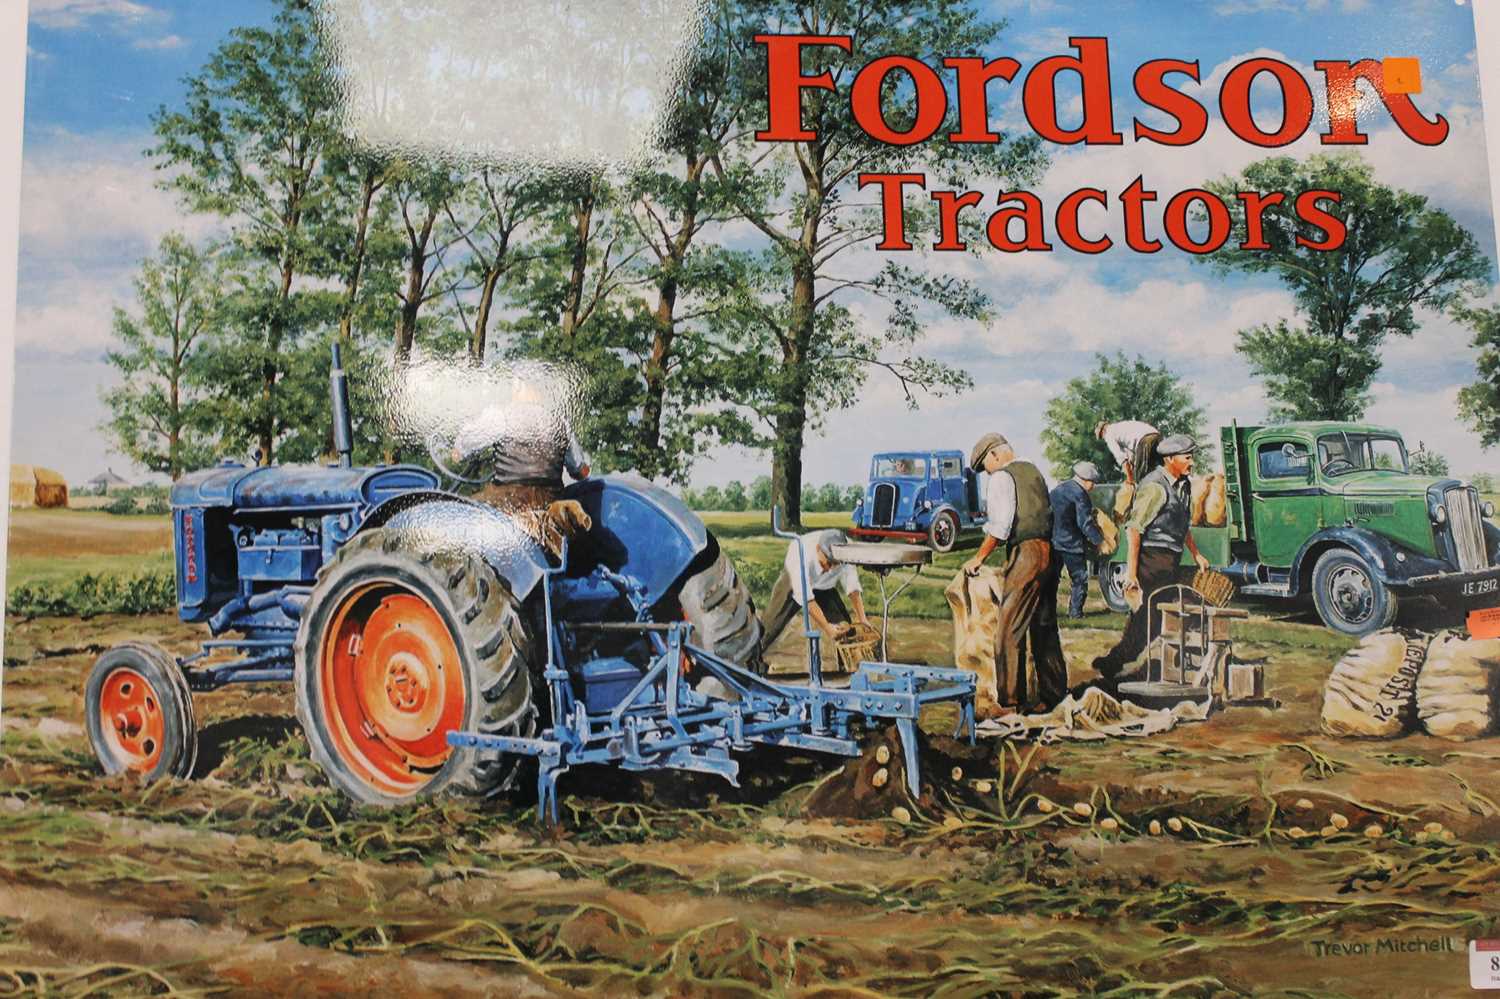 A reproduction Fordson Tractors advertising wall plaque, 49x70cm - Image 2 of 3